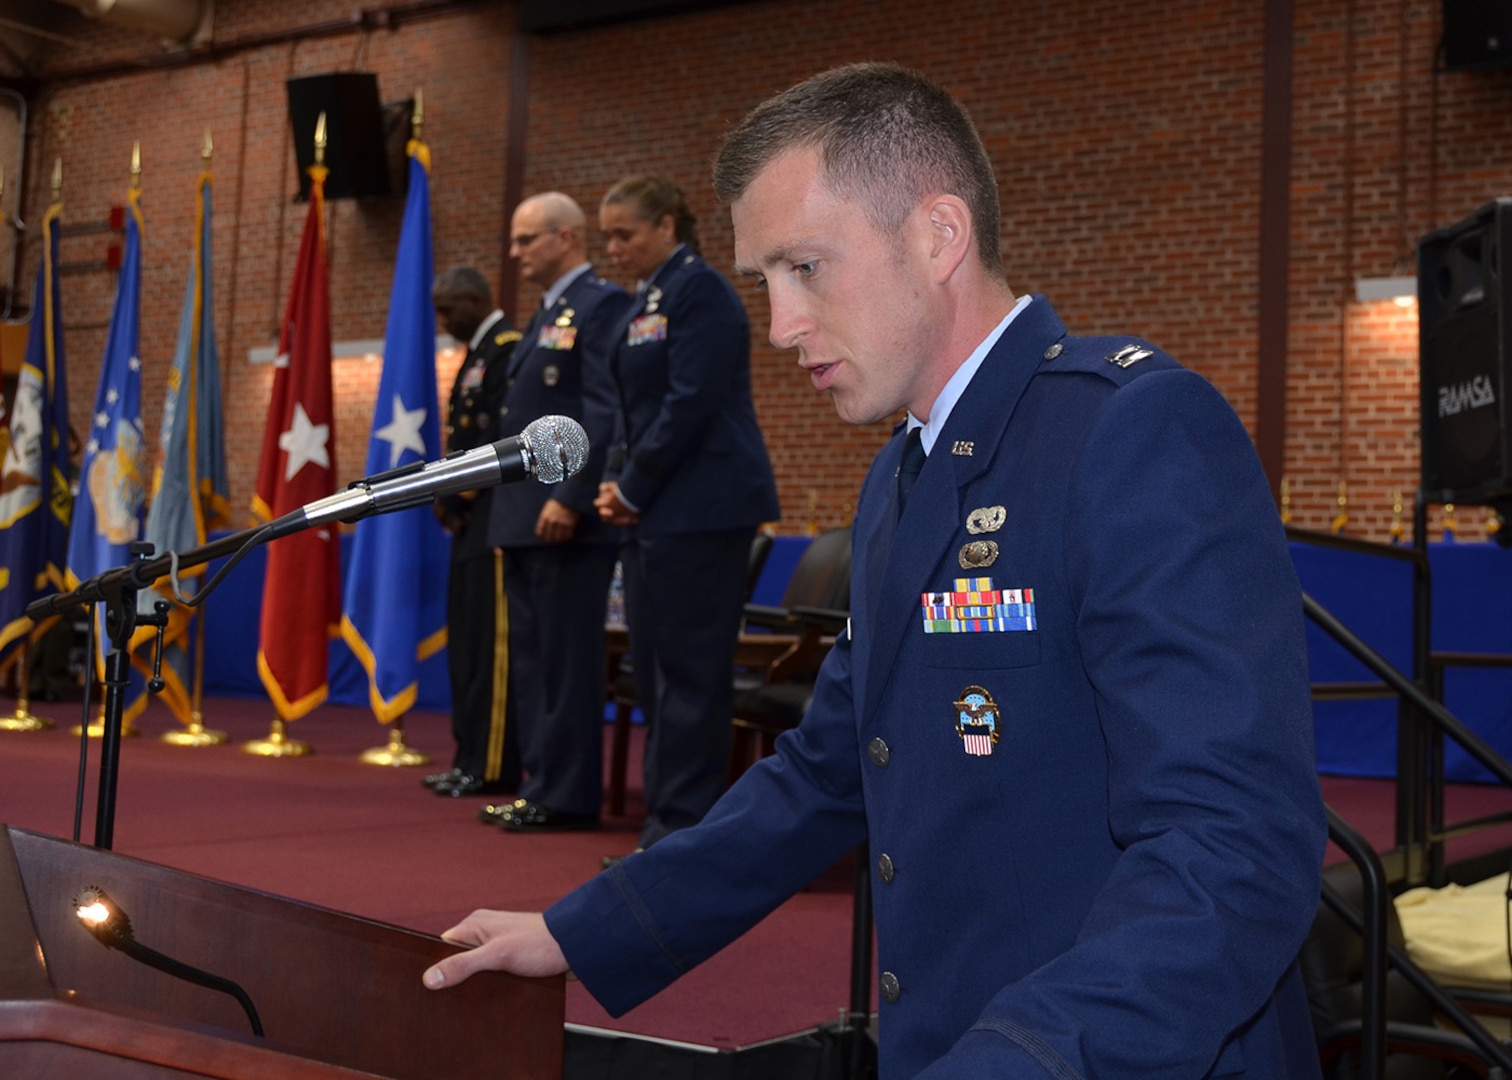 Capt. Musleve stands at a podium and narrates the 2017 DLA Aviation Change of Command Ceremony.